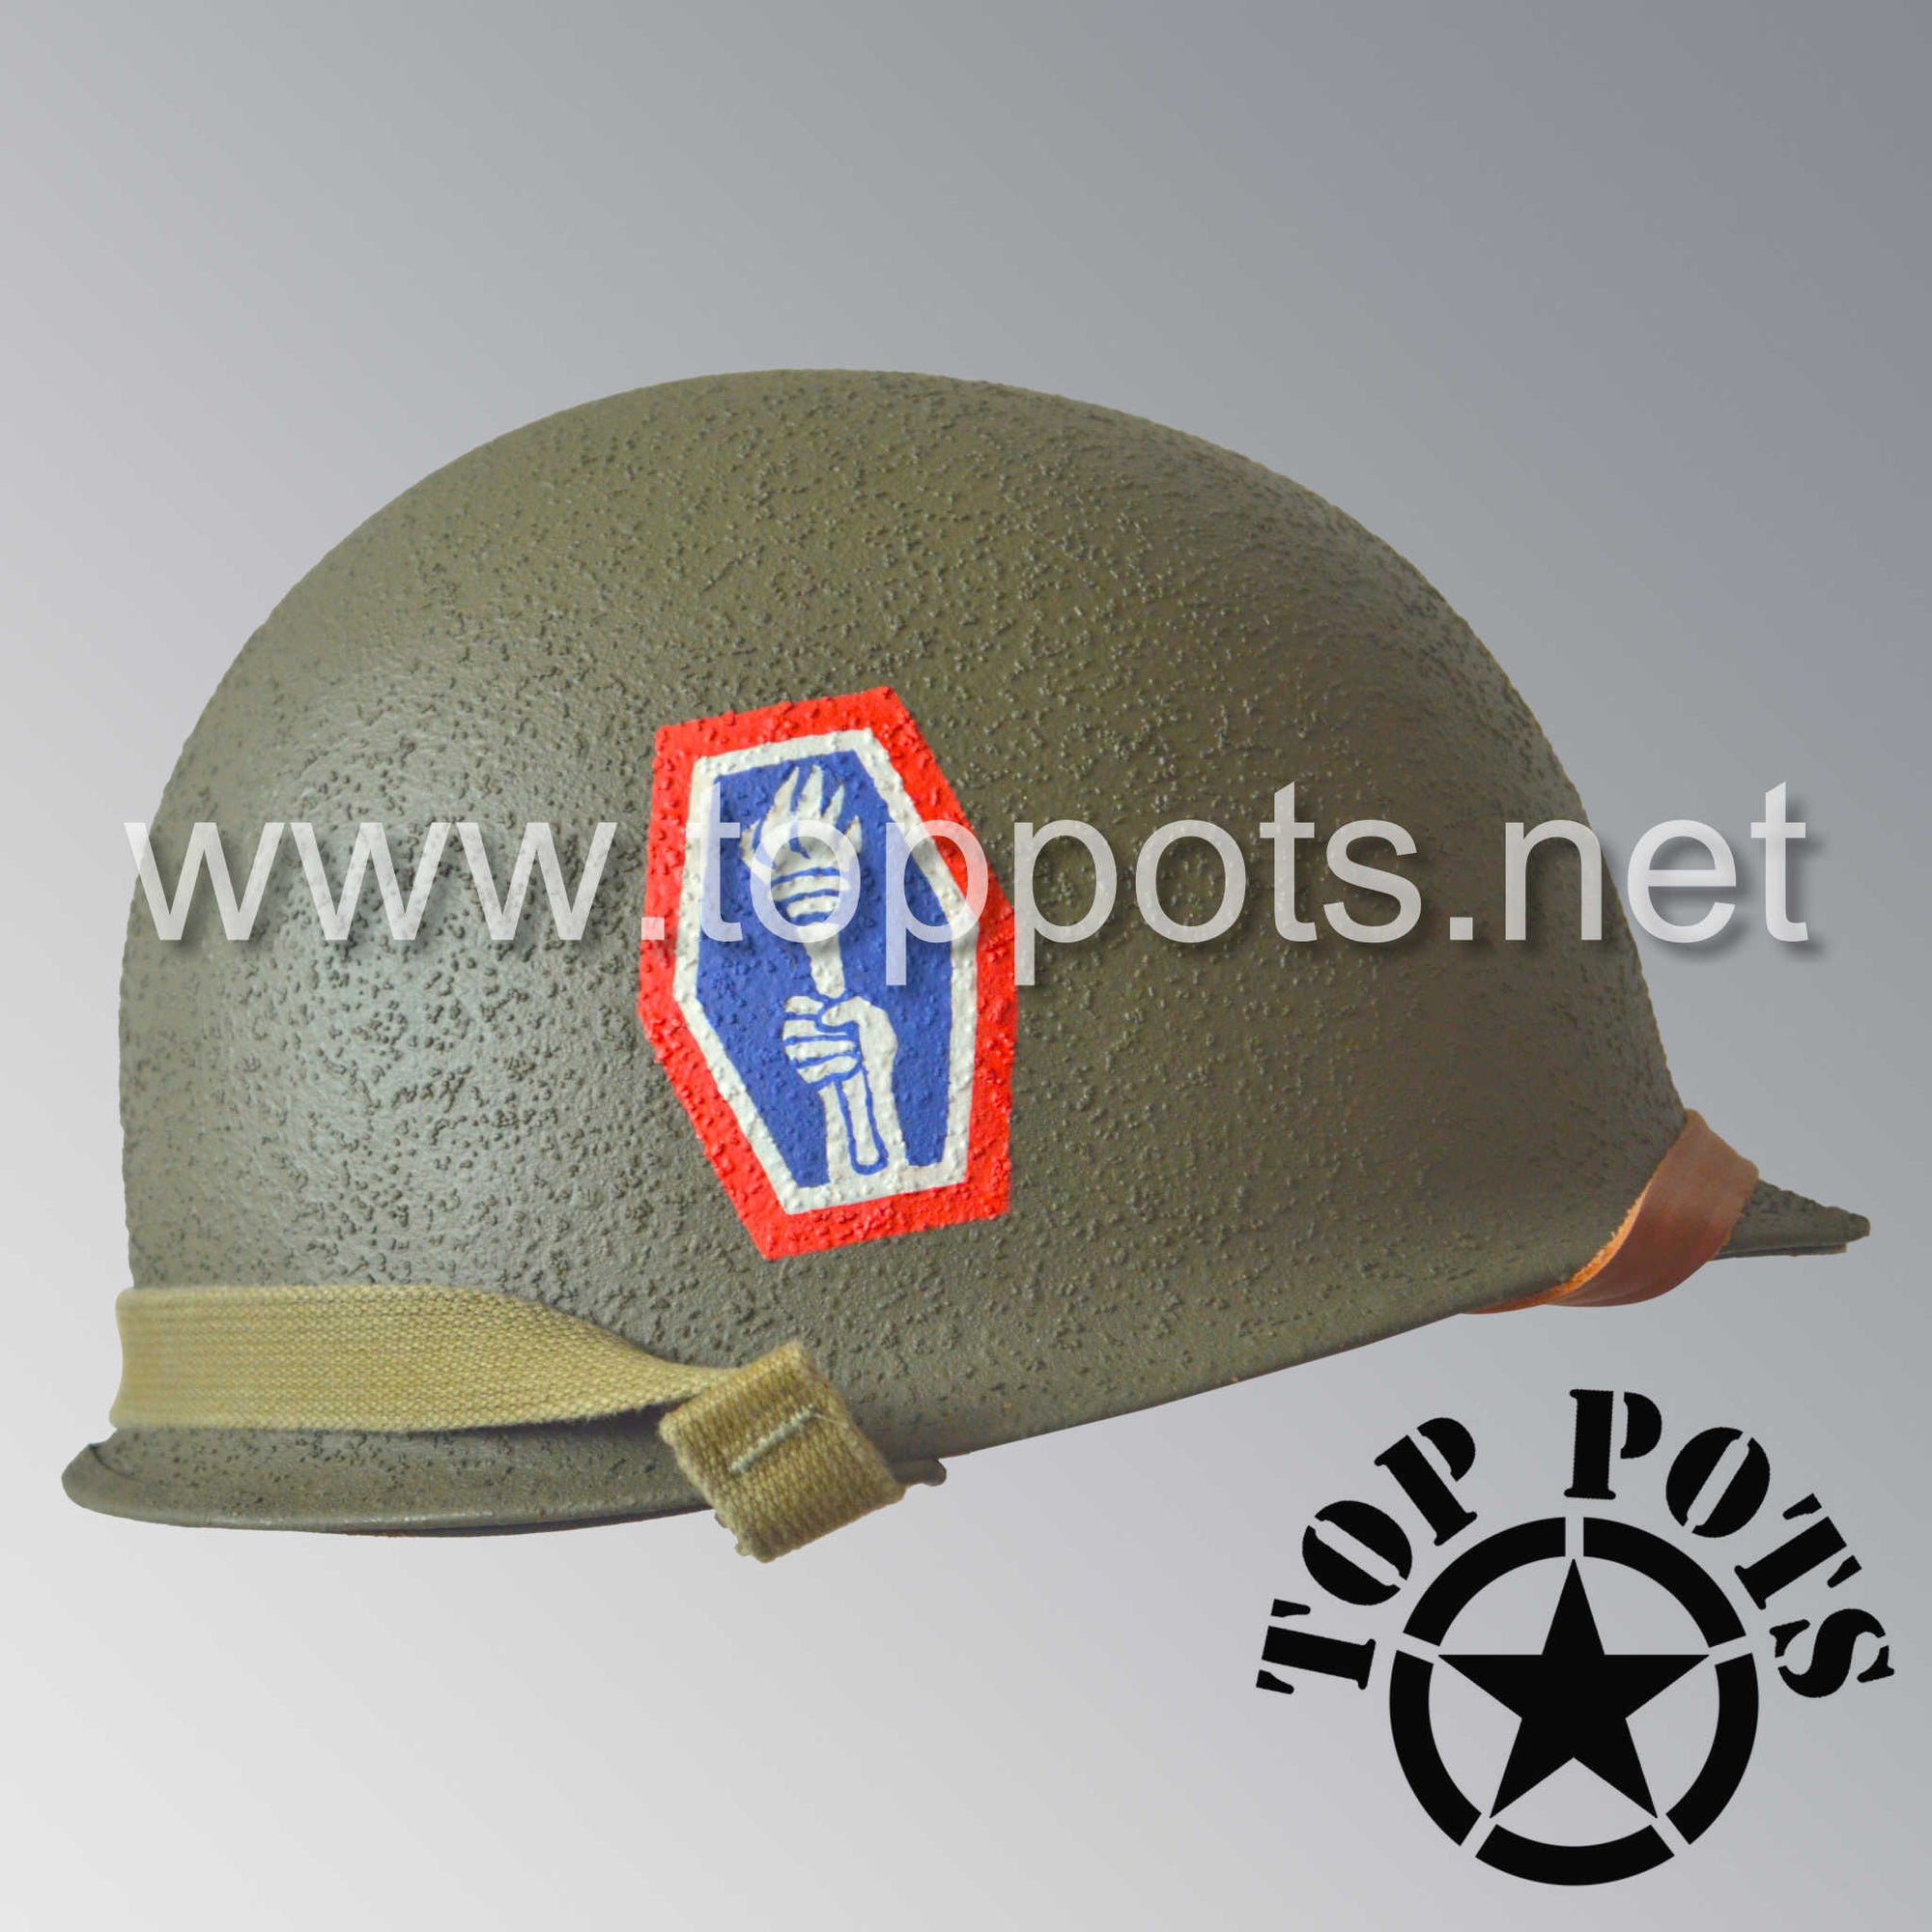 WWII US Army Restored Original M1 Infantry Helmet Swivel Bale Shell and Liner with 442nd Infantry Division Emblem